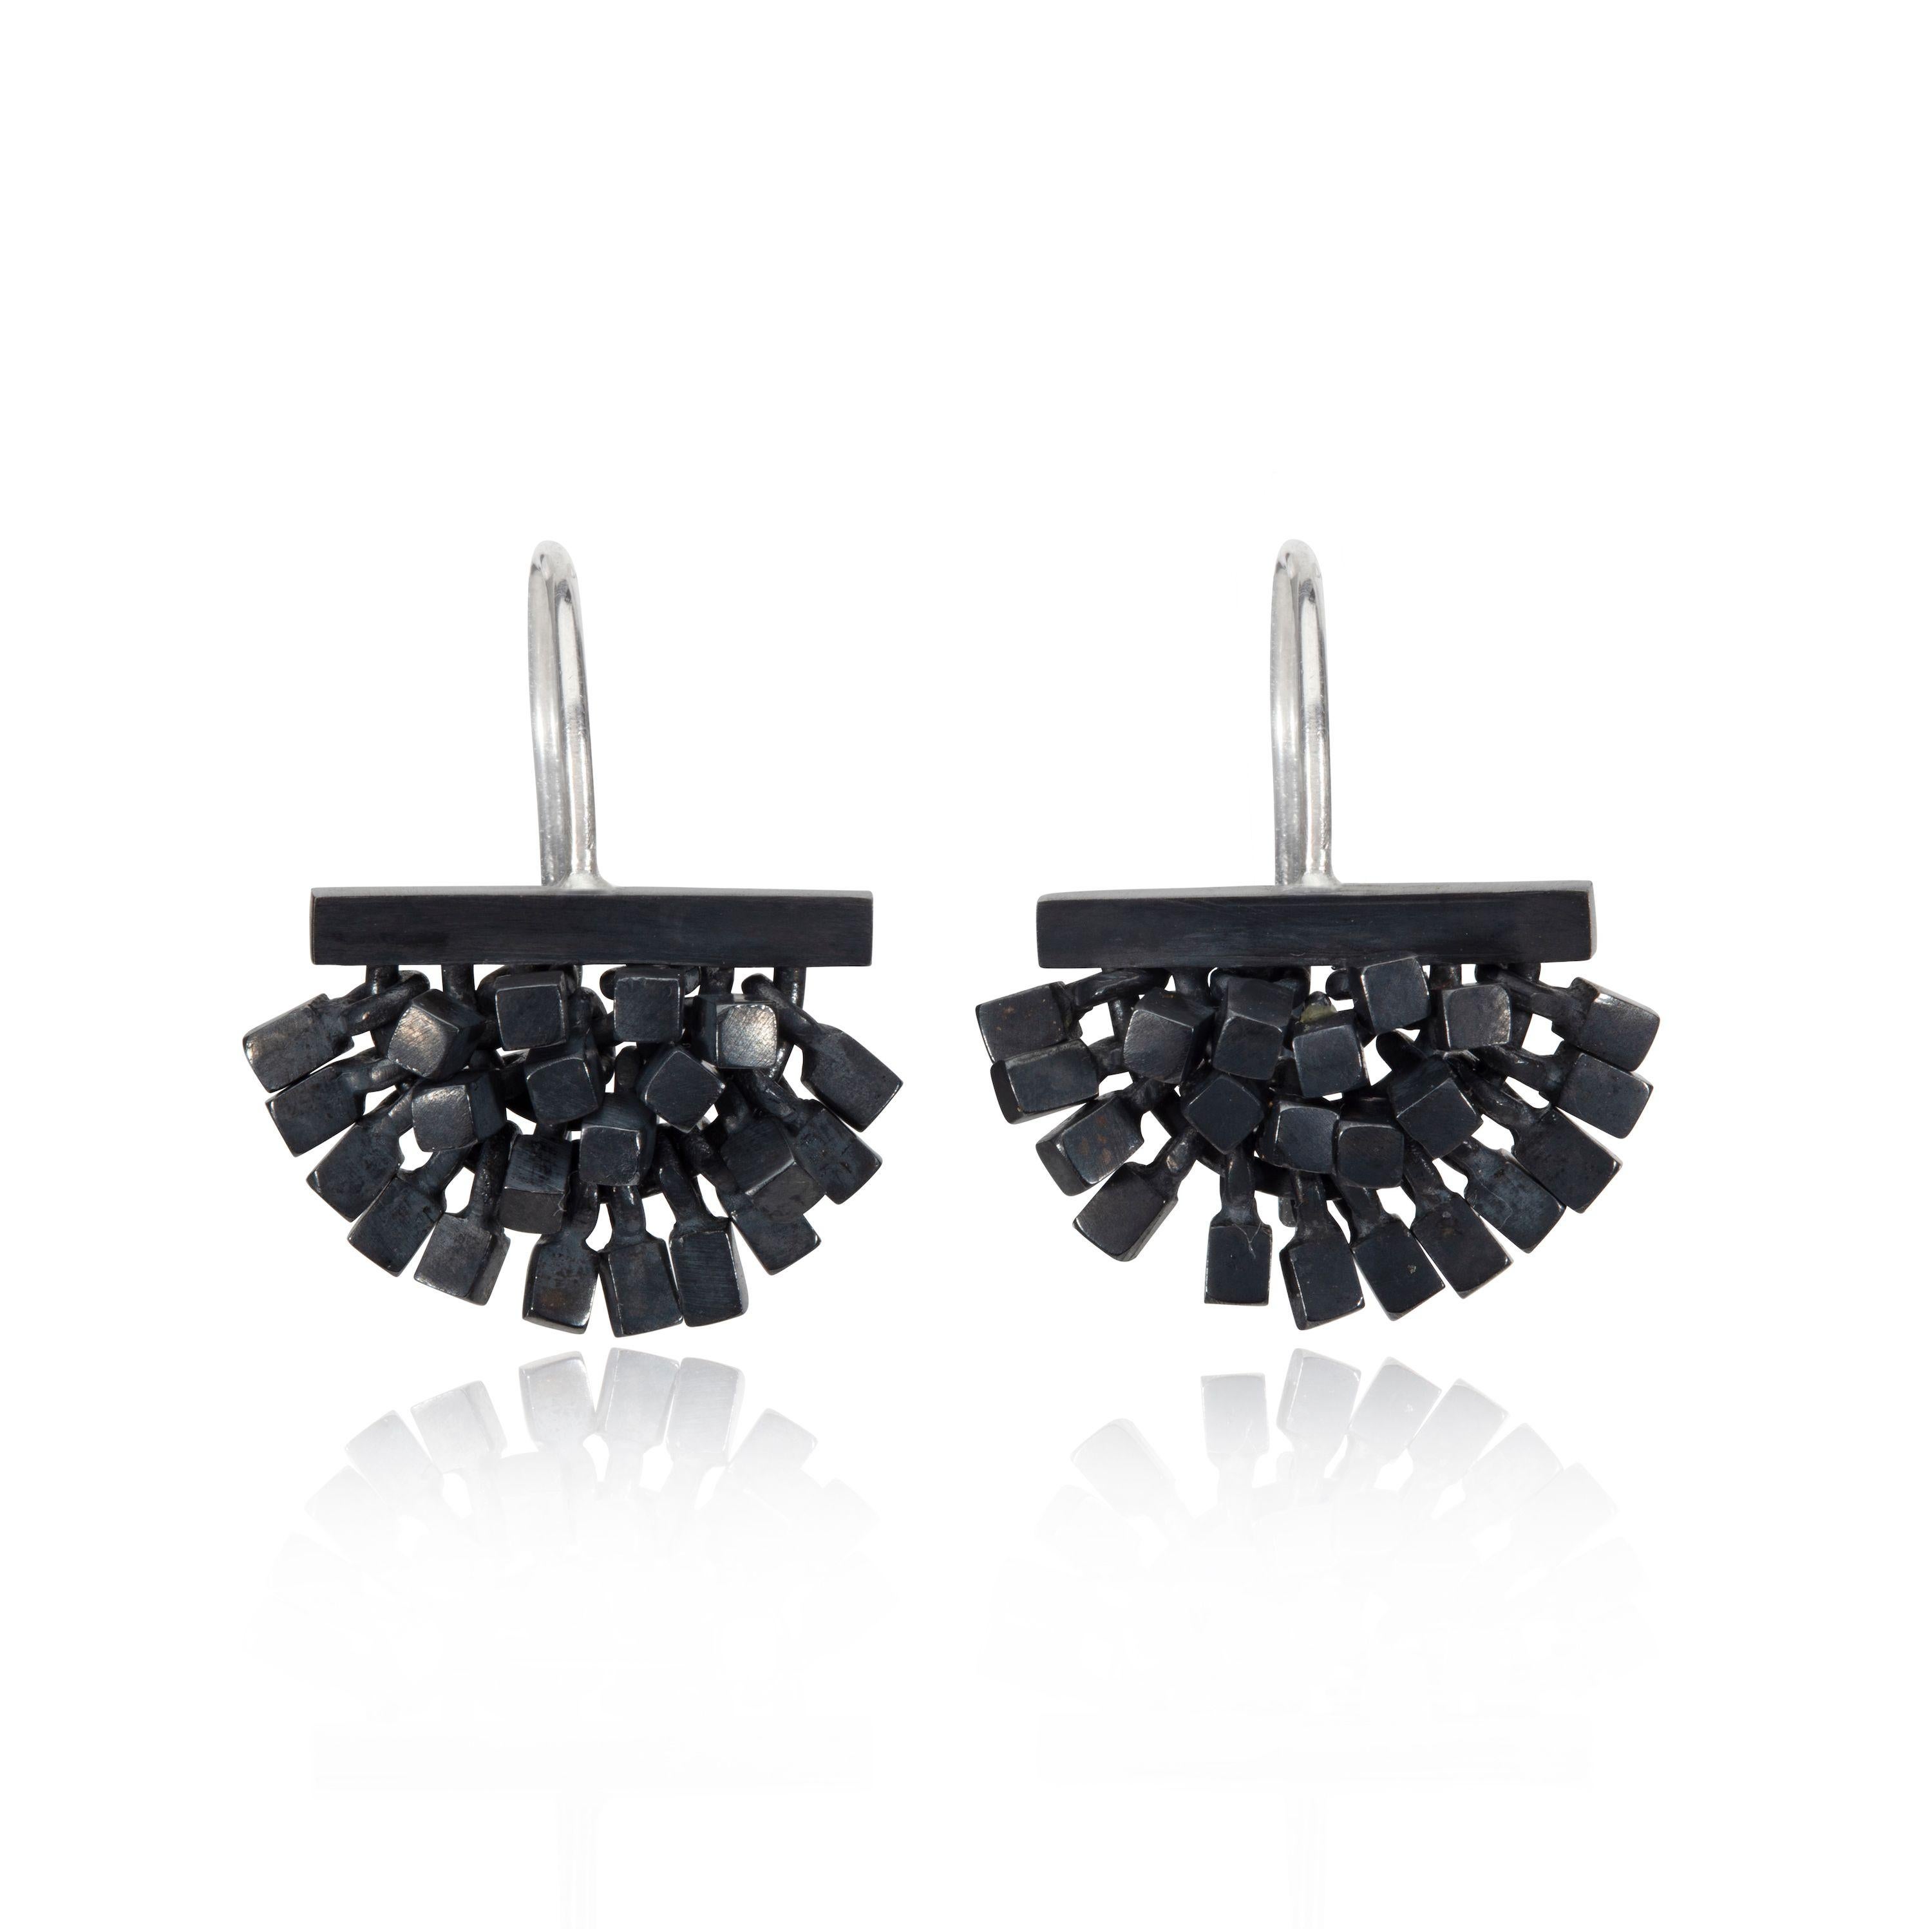 These earrings are designed and made by UK jeweler Sarah Pulvertaft. Done in a very contemporary oxidised sterling silver these earrings are comprised of individual mini cubes affixed to a horizontal bar. Moveable cubes, each capturing the